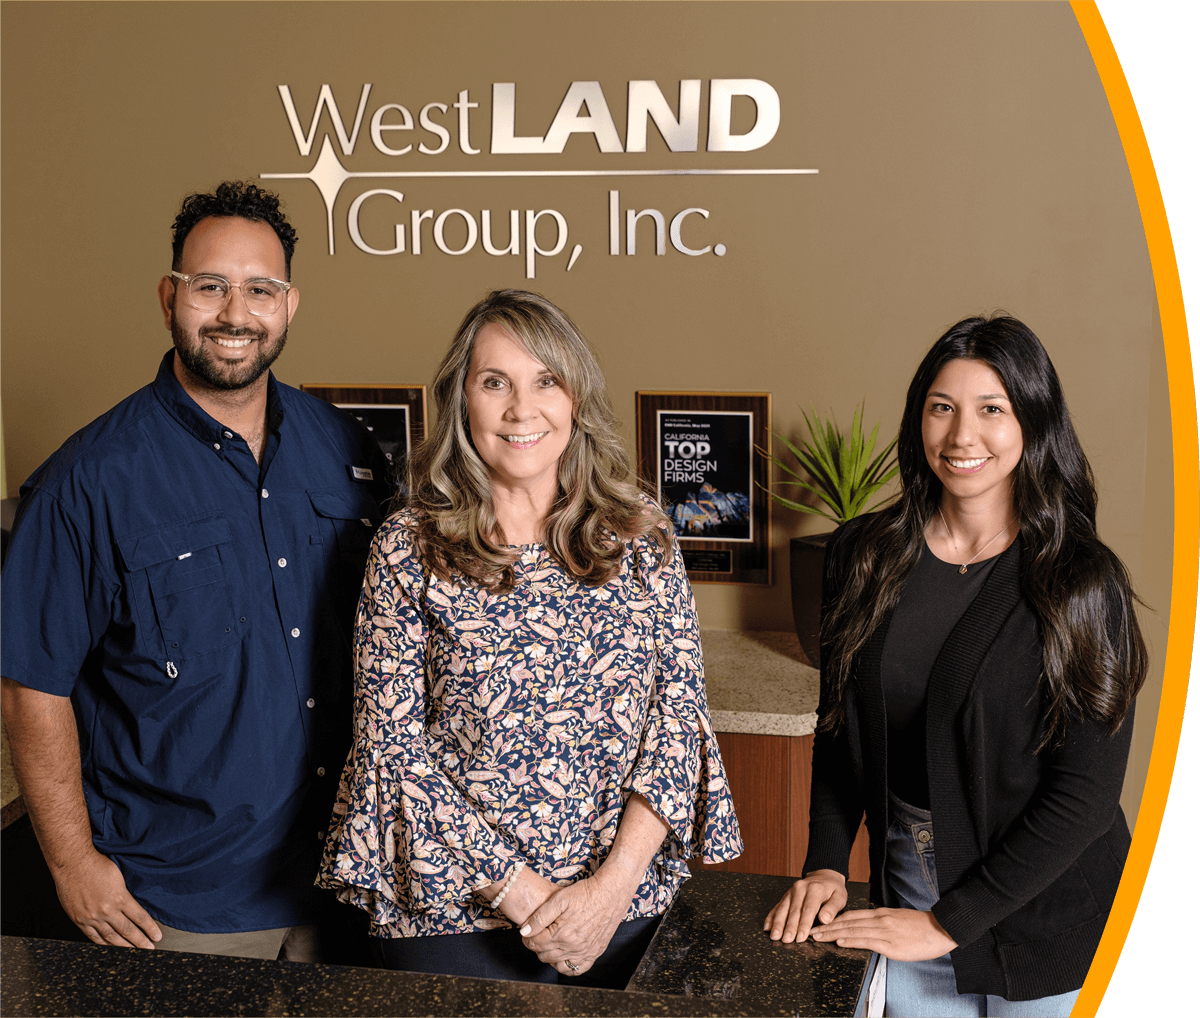 WestLAND's Group Who We Are Image - Shows WestLAND Group's employees standing over the WestLAND Group Signage and in front of Top Design Firm Award.